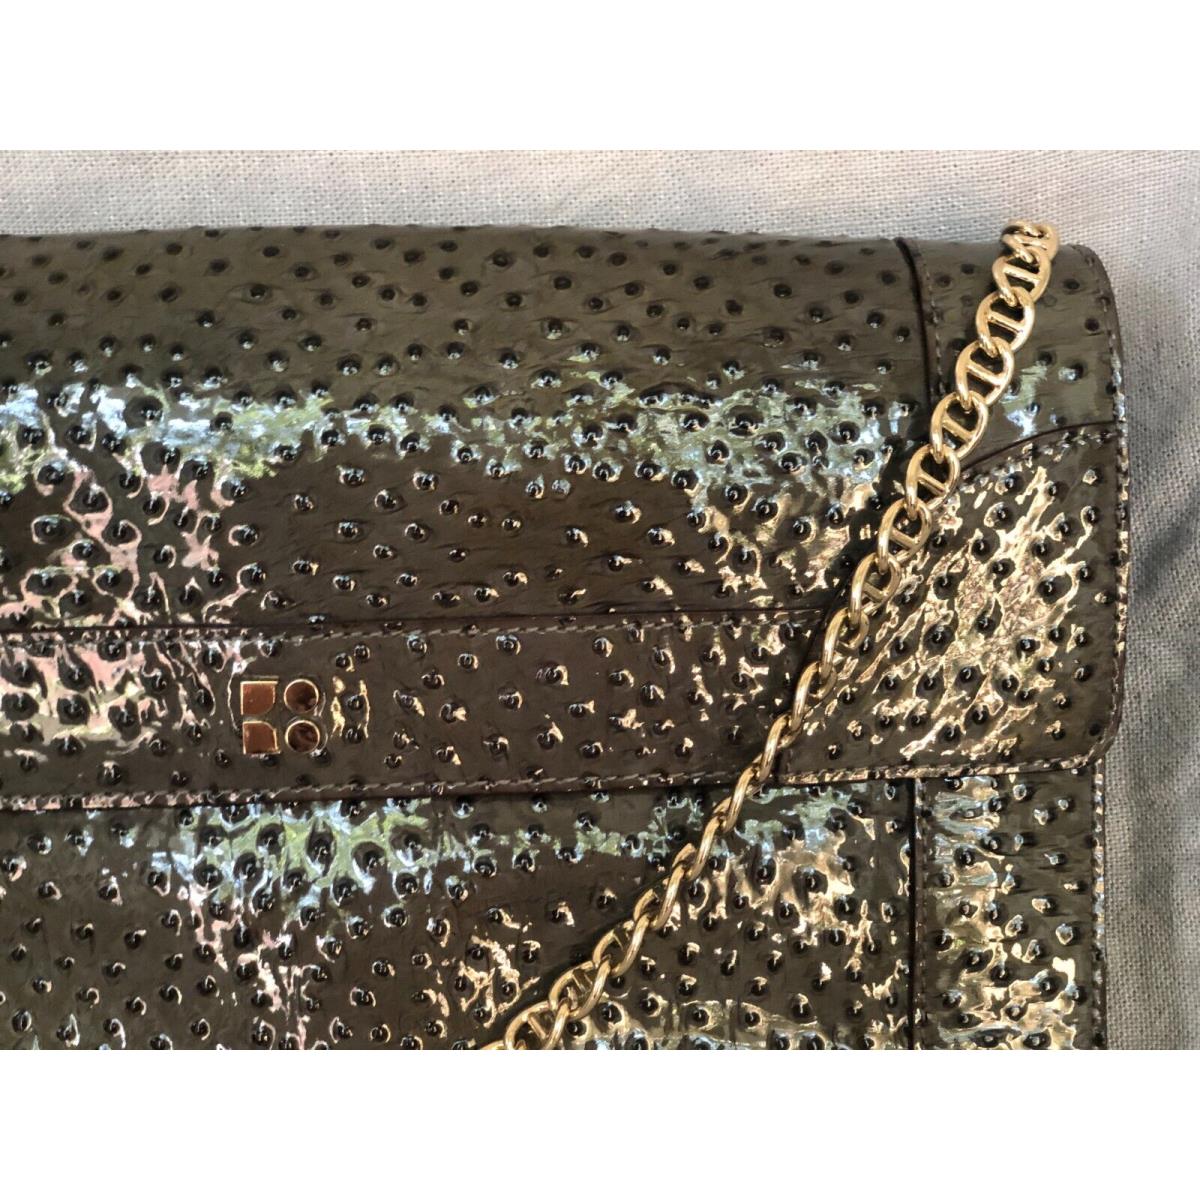 Kate Spade New Exotic Paola Elba Gray Clutch Purse Bag Ostrich Patent Leather